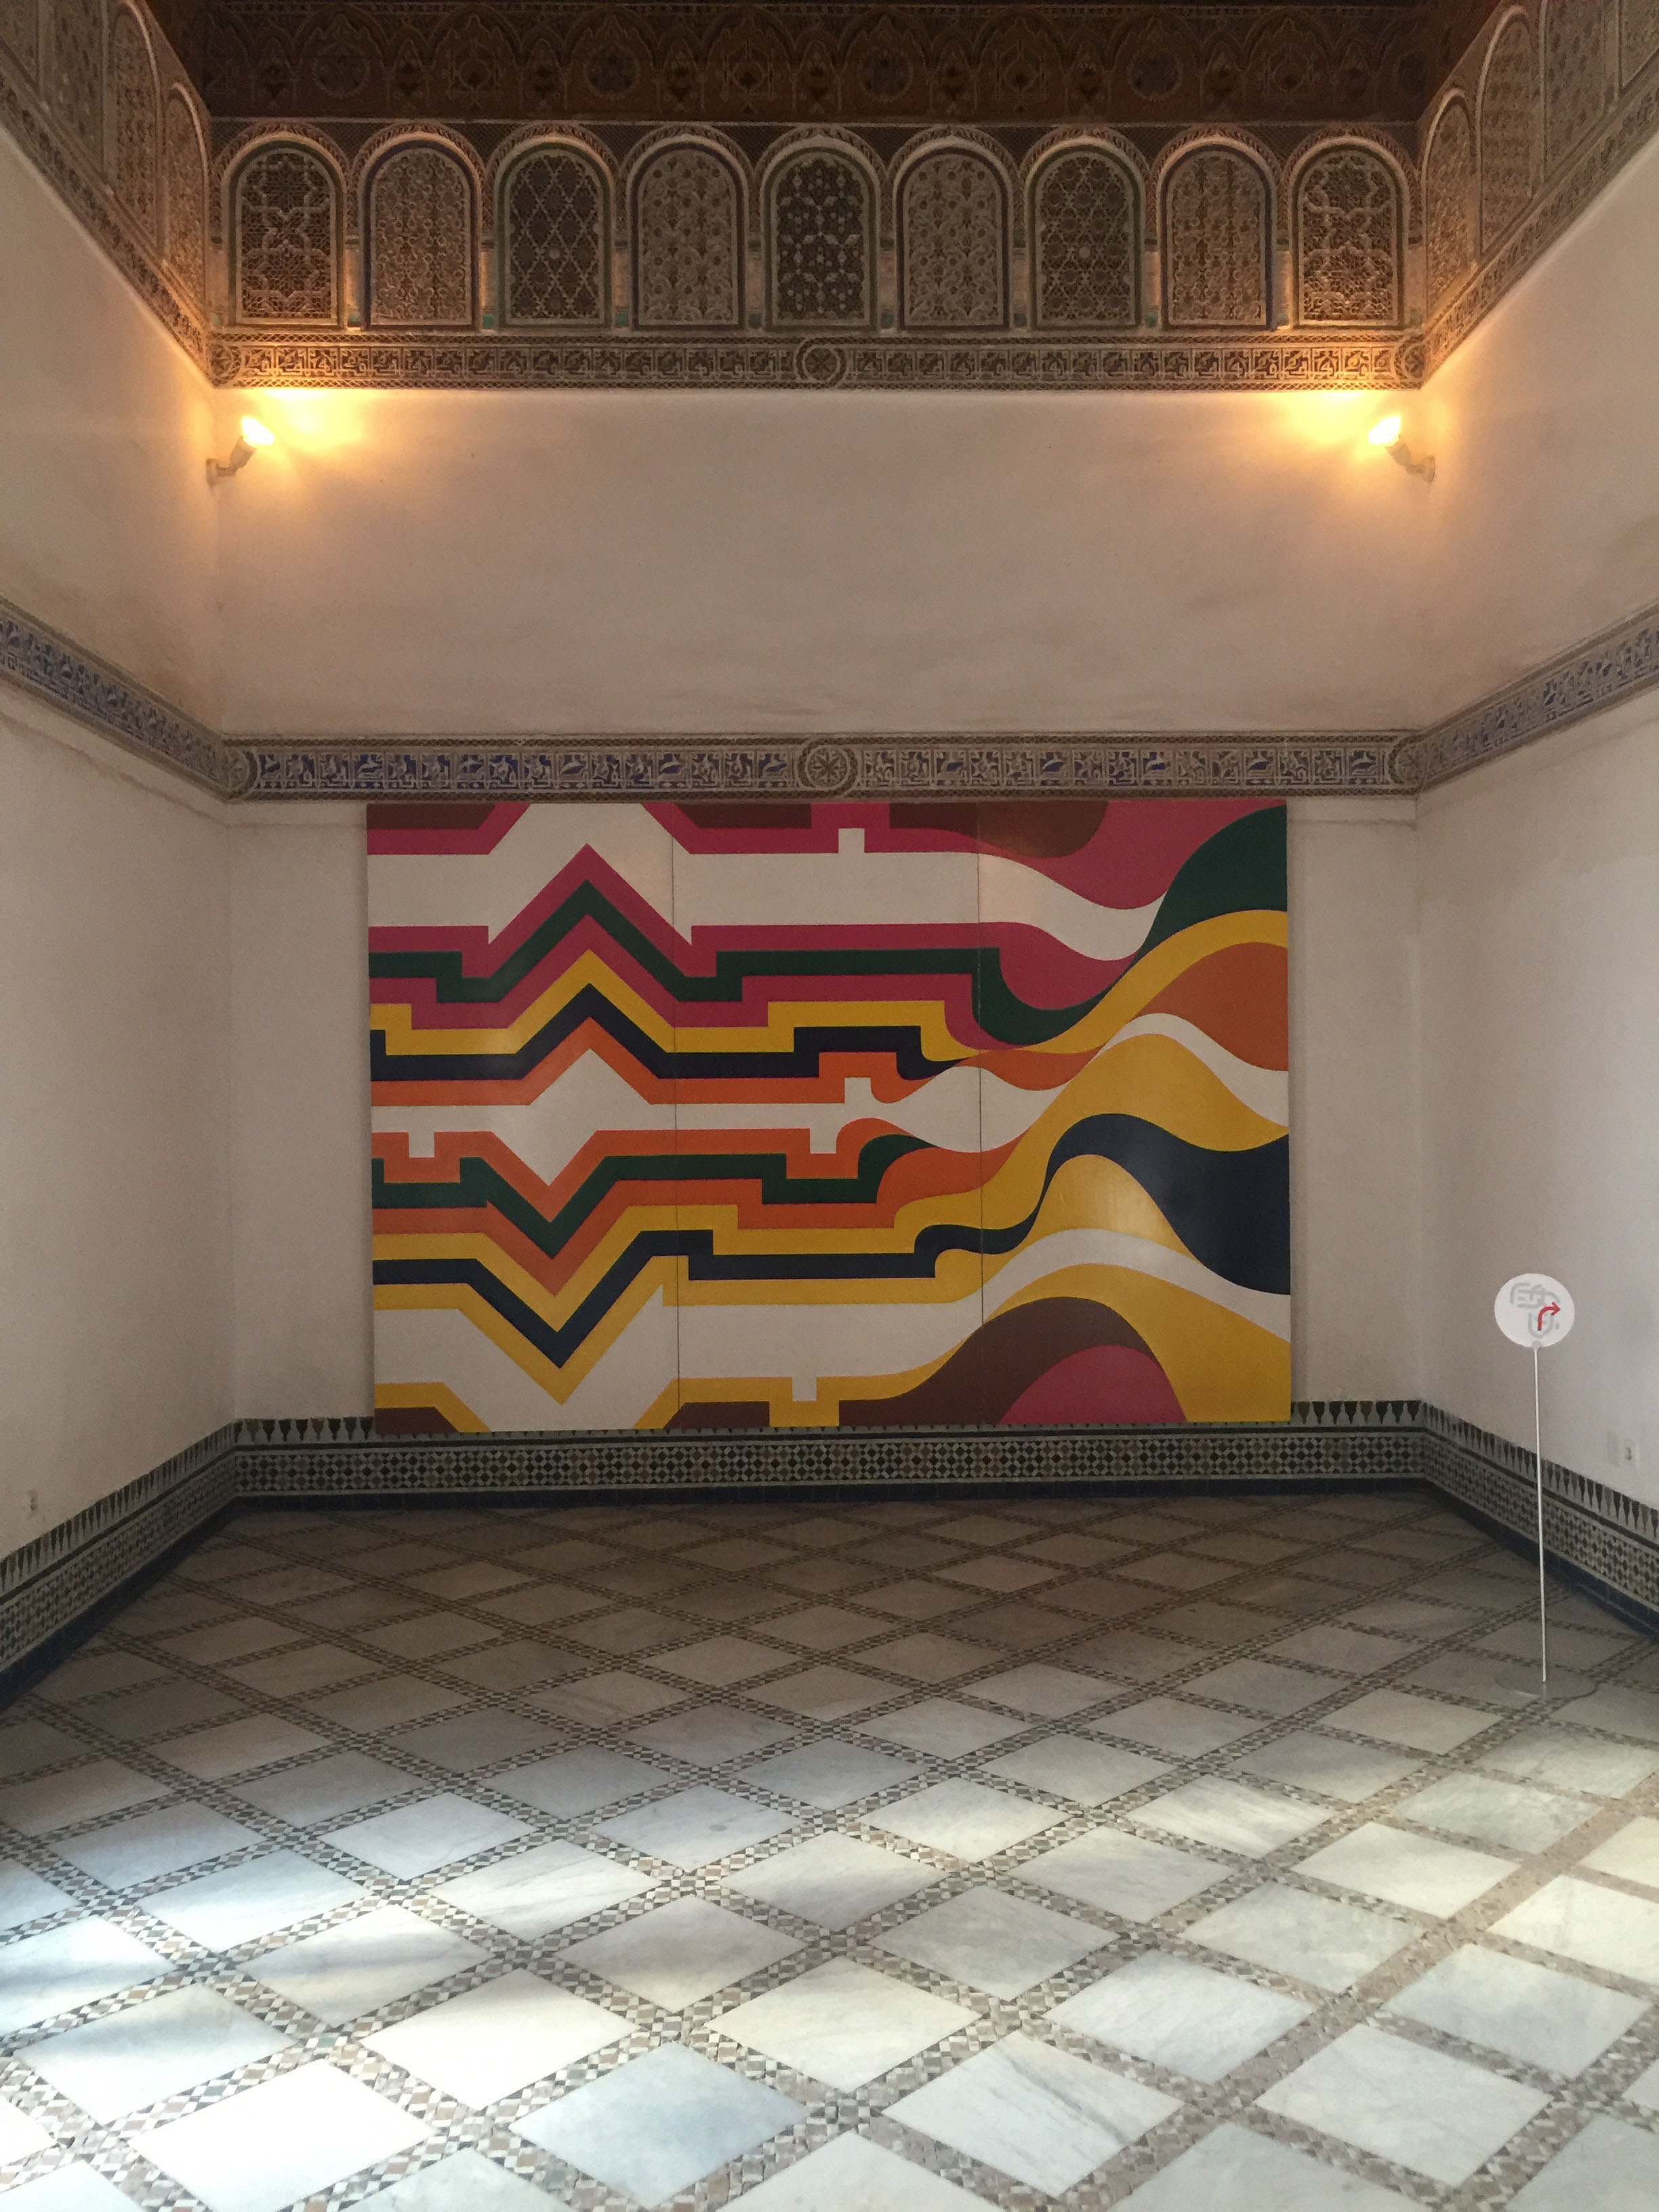 Mohammed Chabâa, Installation view of “Composition,” cellulose paint on wood, 2.5 x 3.6 m, 1975. Photo by Julian Myers-Szupinska. Courtesy of the author.